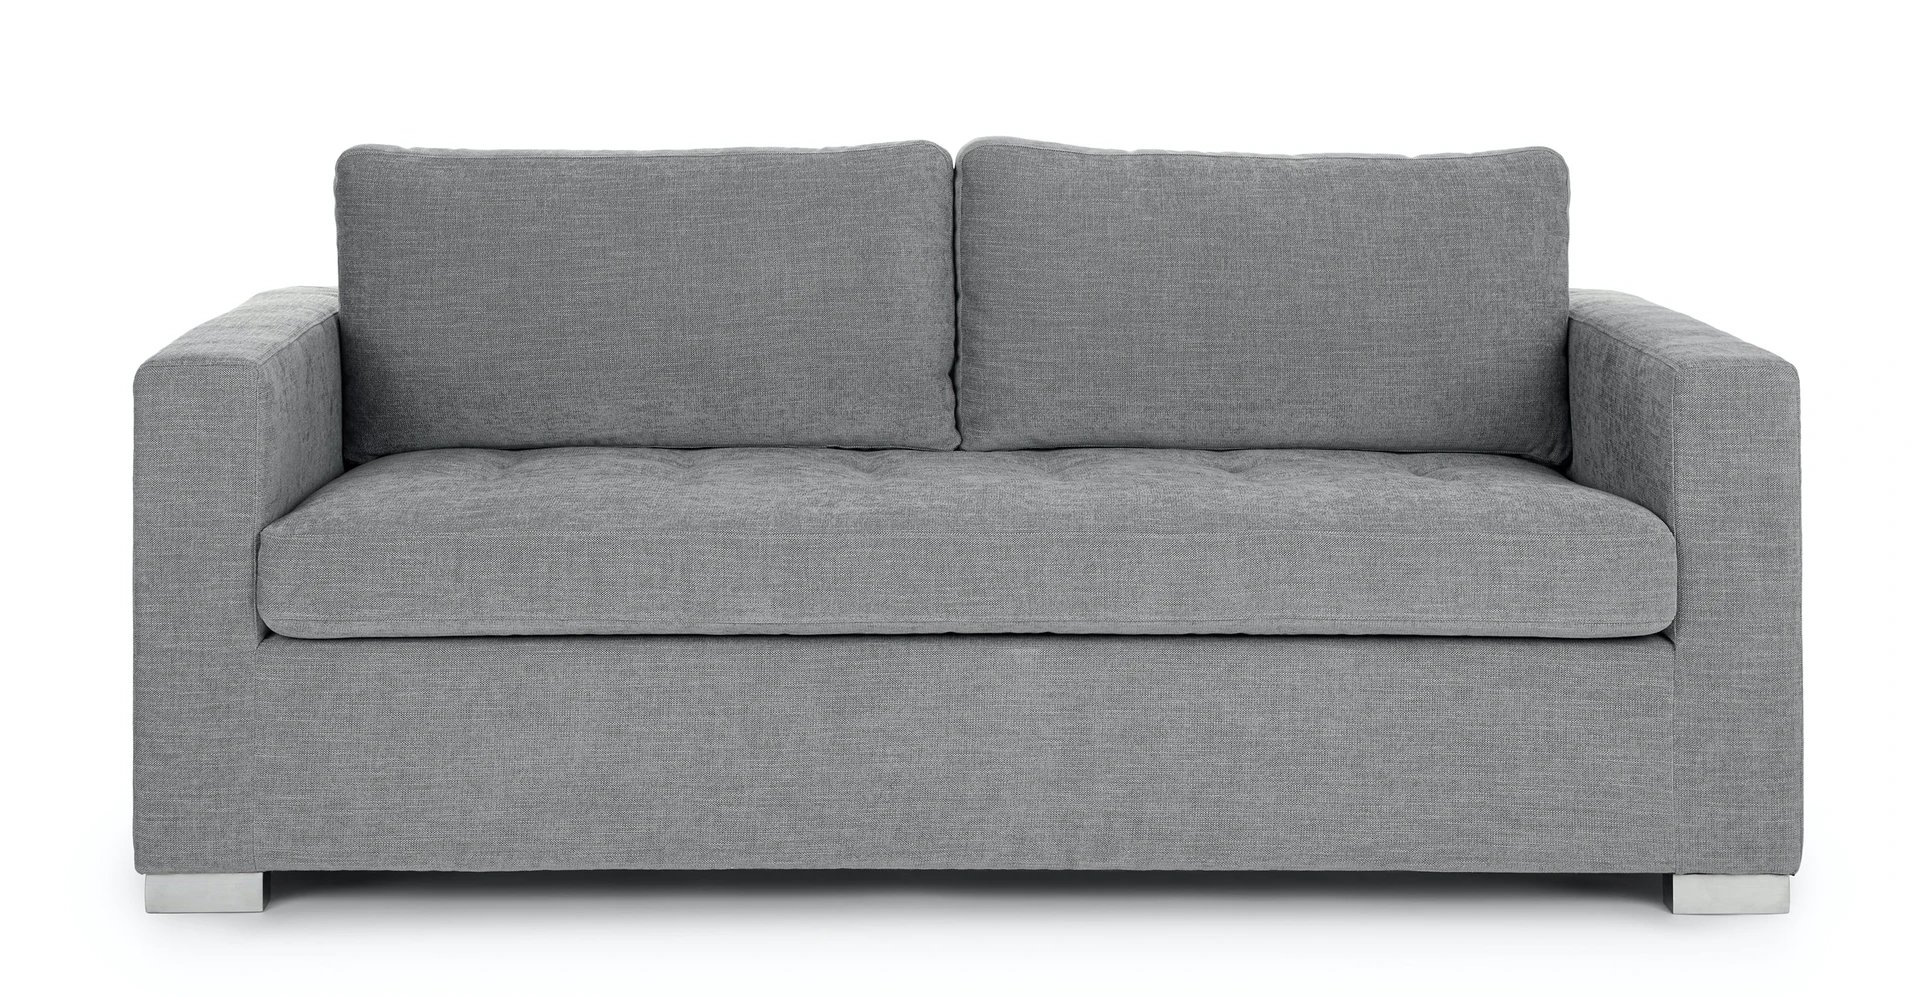 article soma sofa bed comfortable